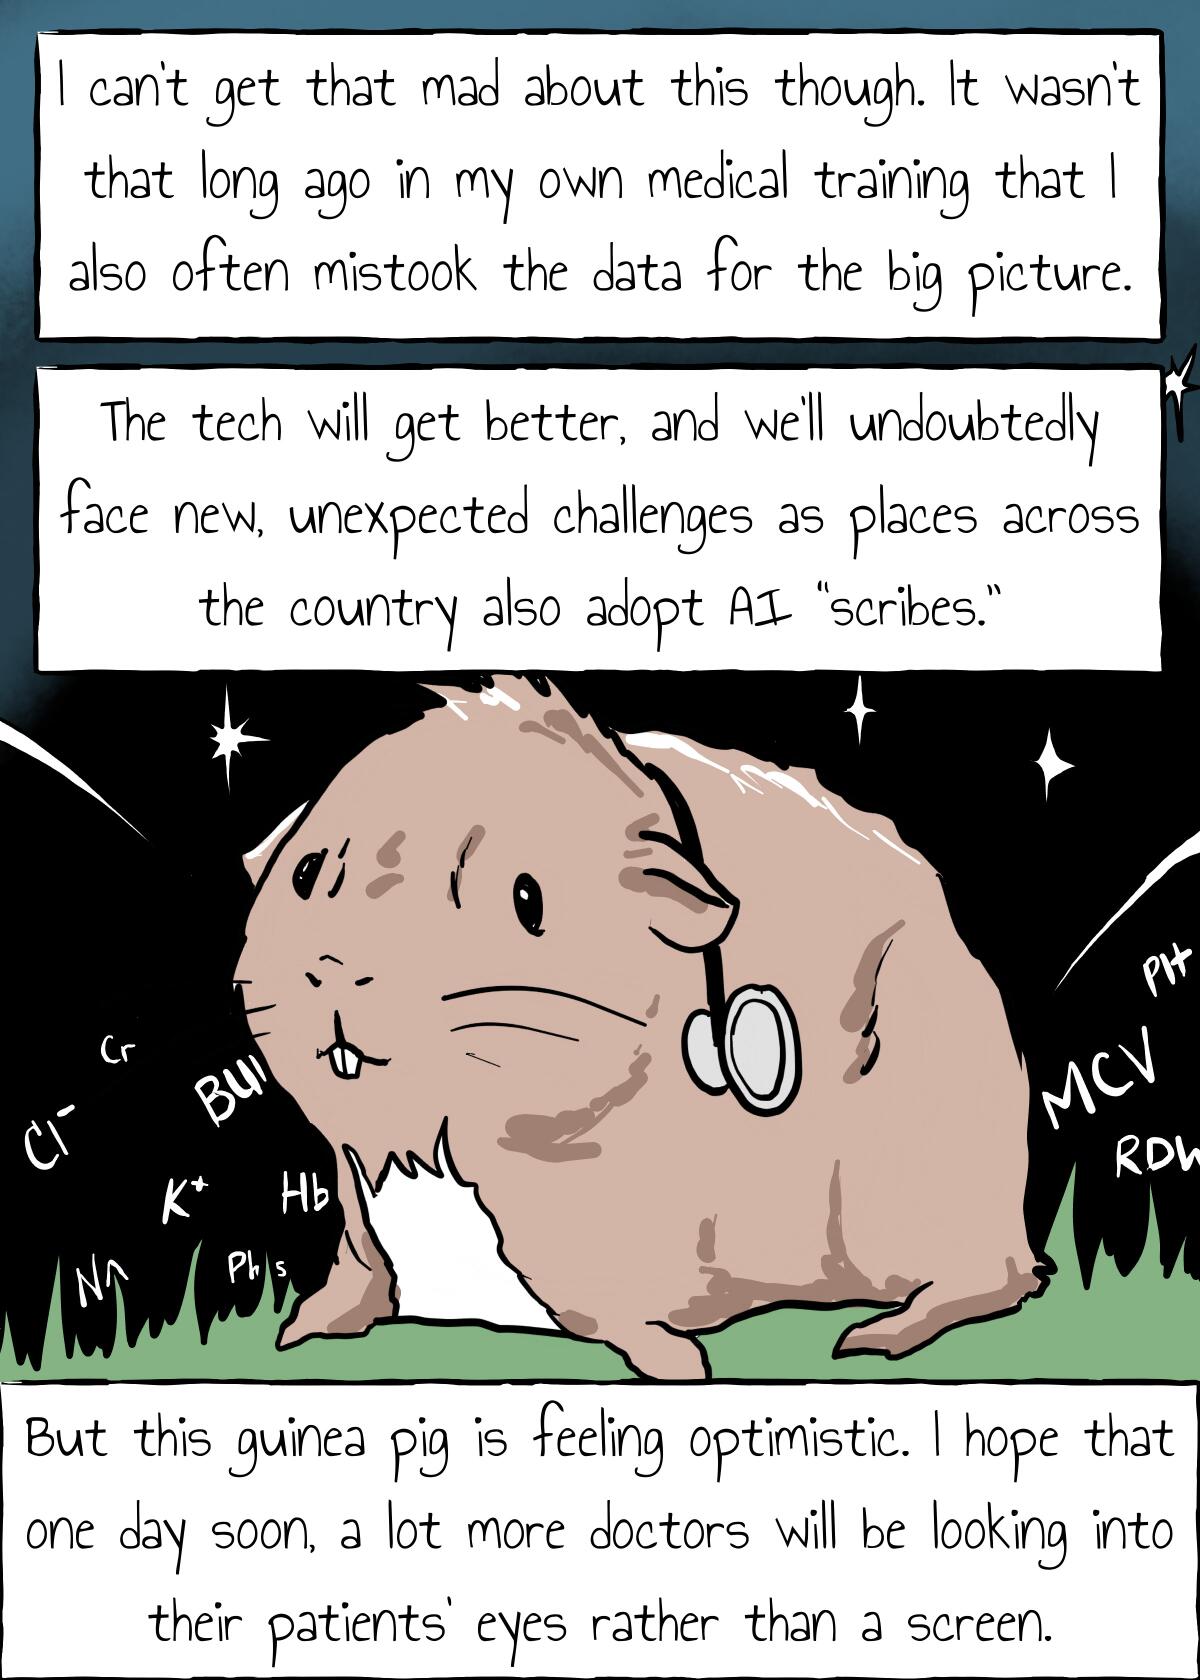 The tech will get better, and we'll face new challenges as more places adopt A.I. But this guinea pig feels optimistic.